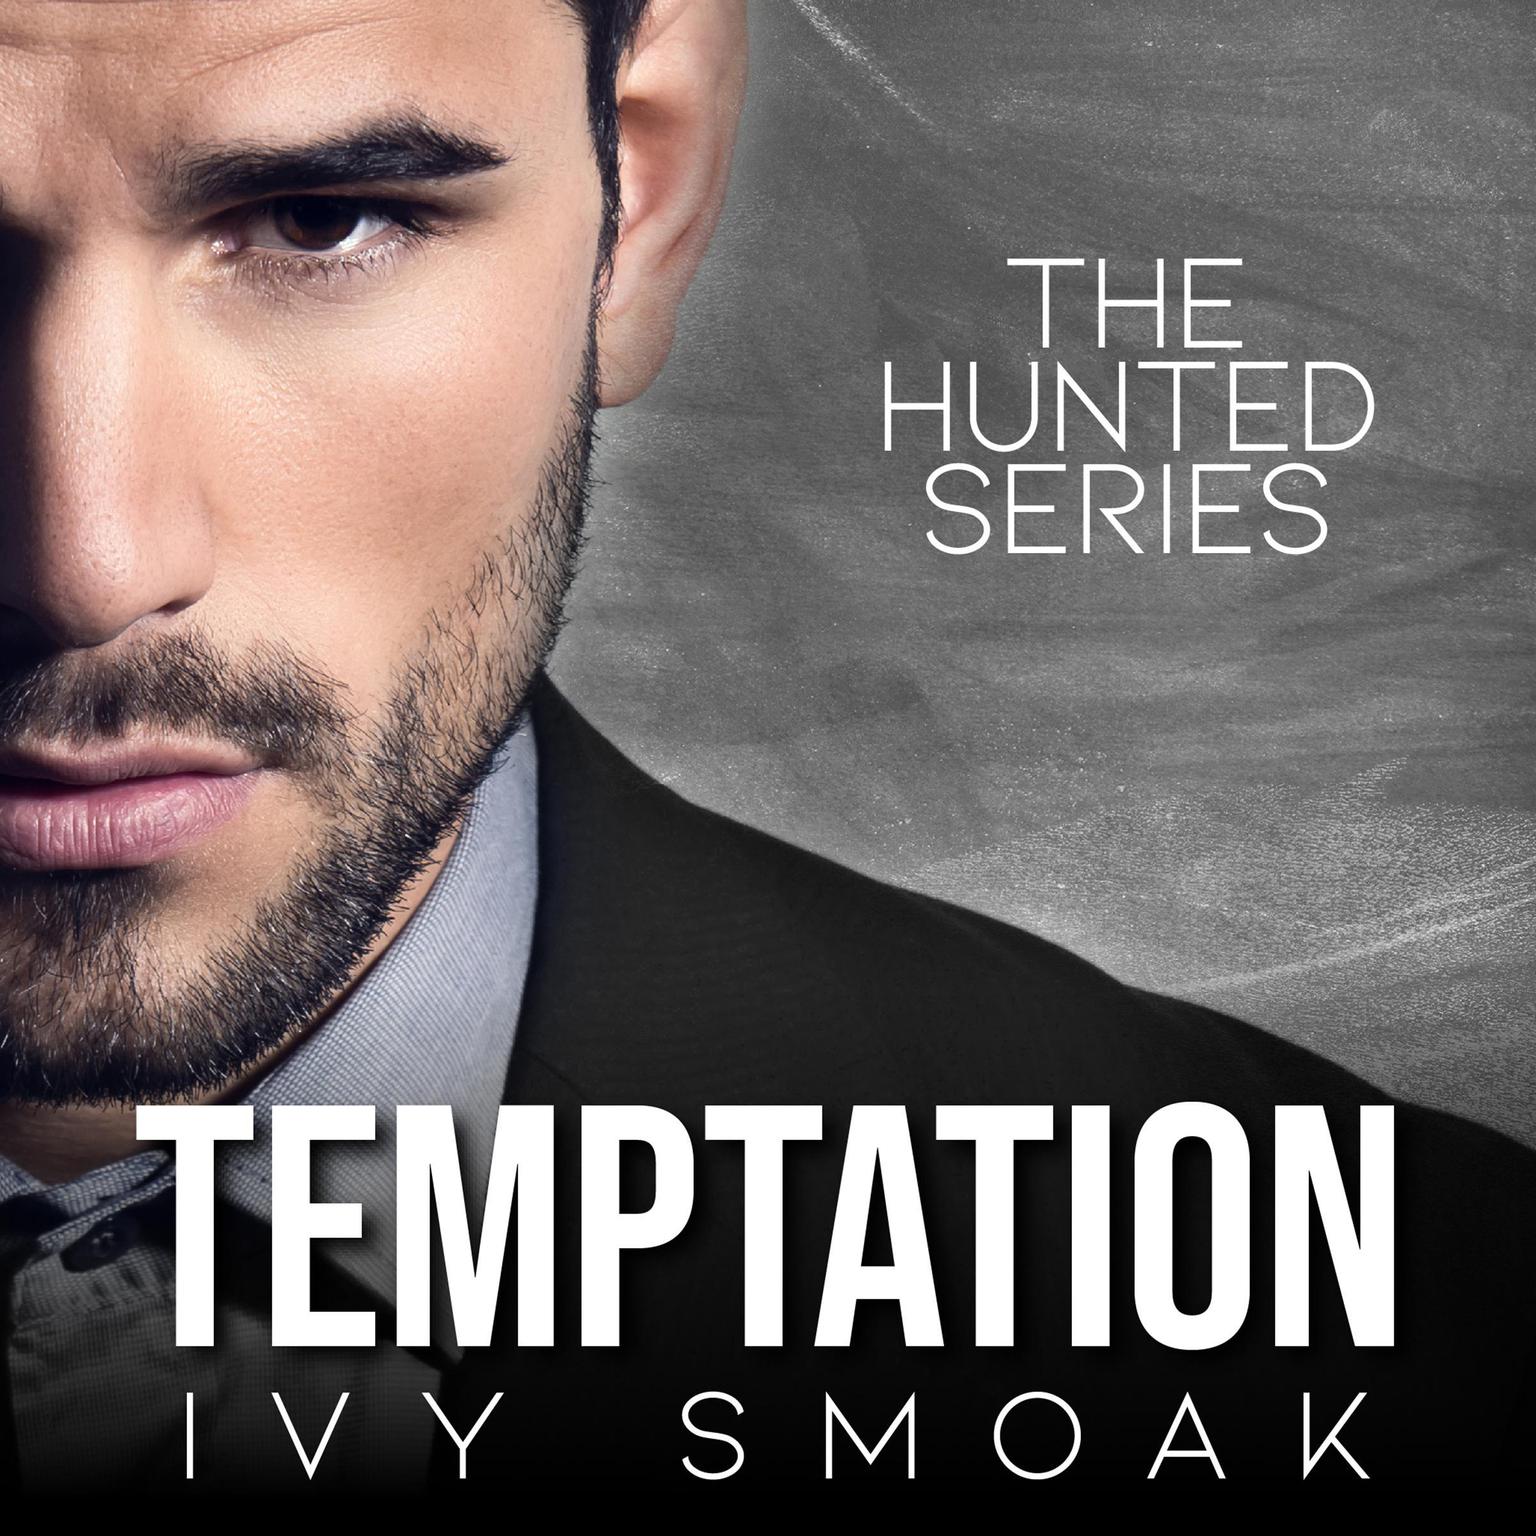 Temptation (The Hunted Series Book 1) Audiobook, by Ivy Smoak